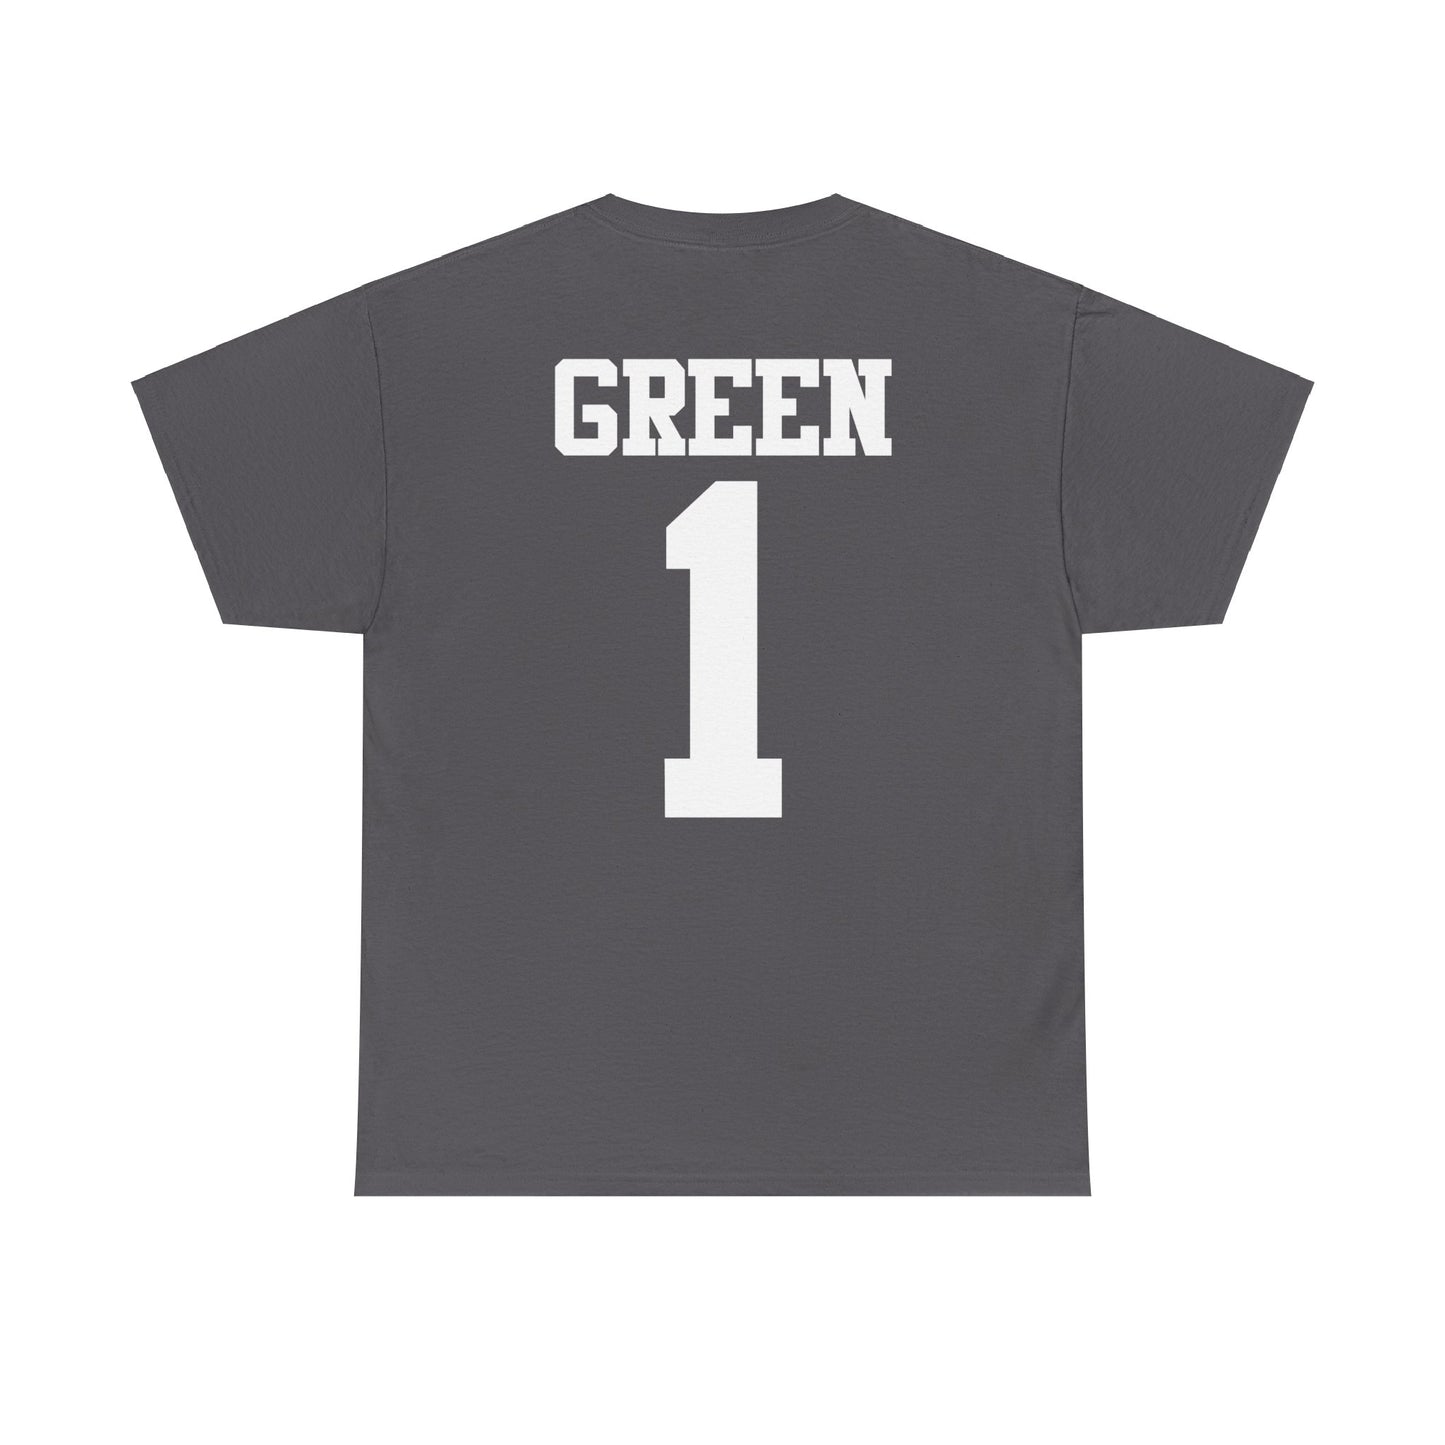 Myla Green: GameDay With Name & Number Tee